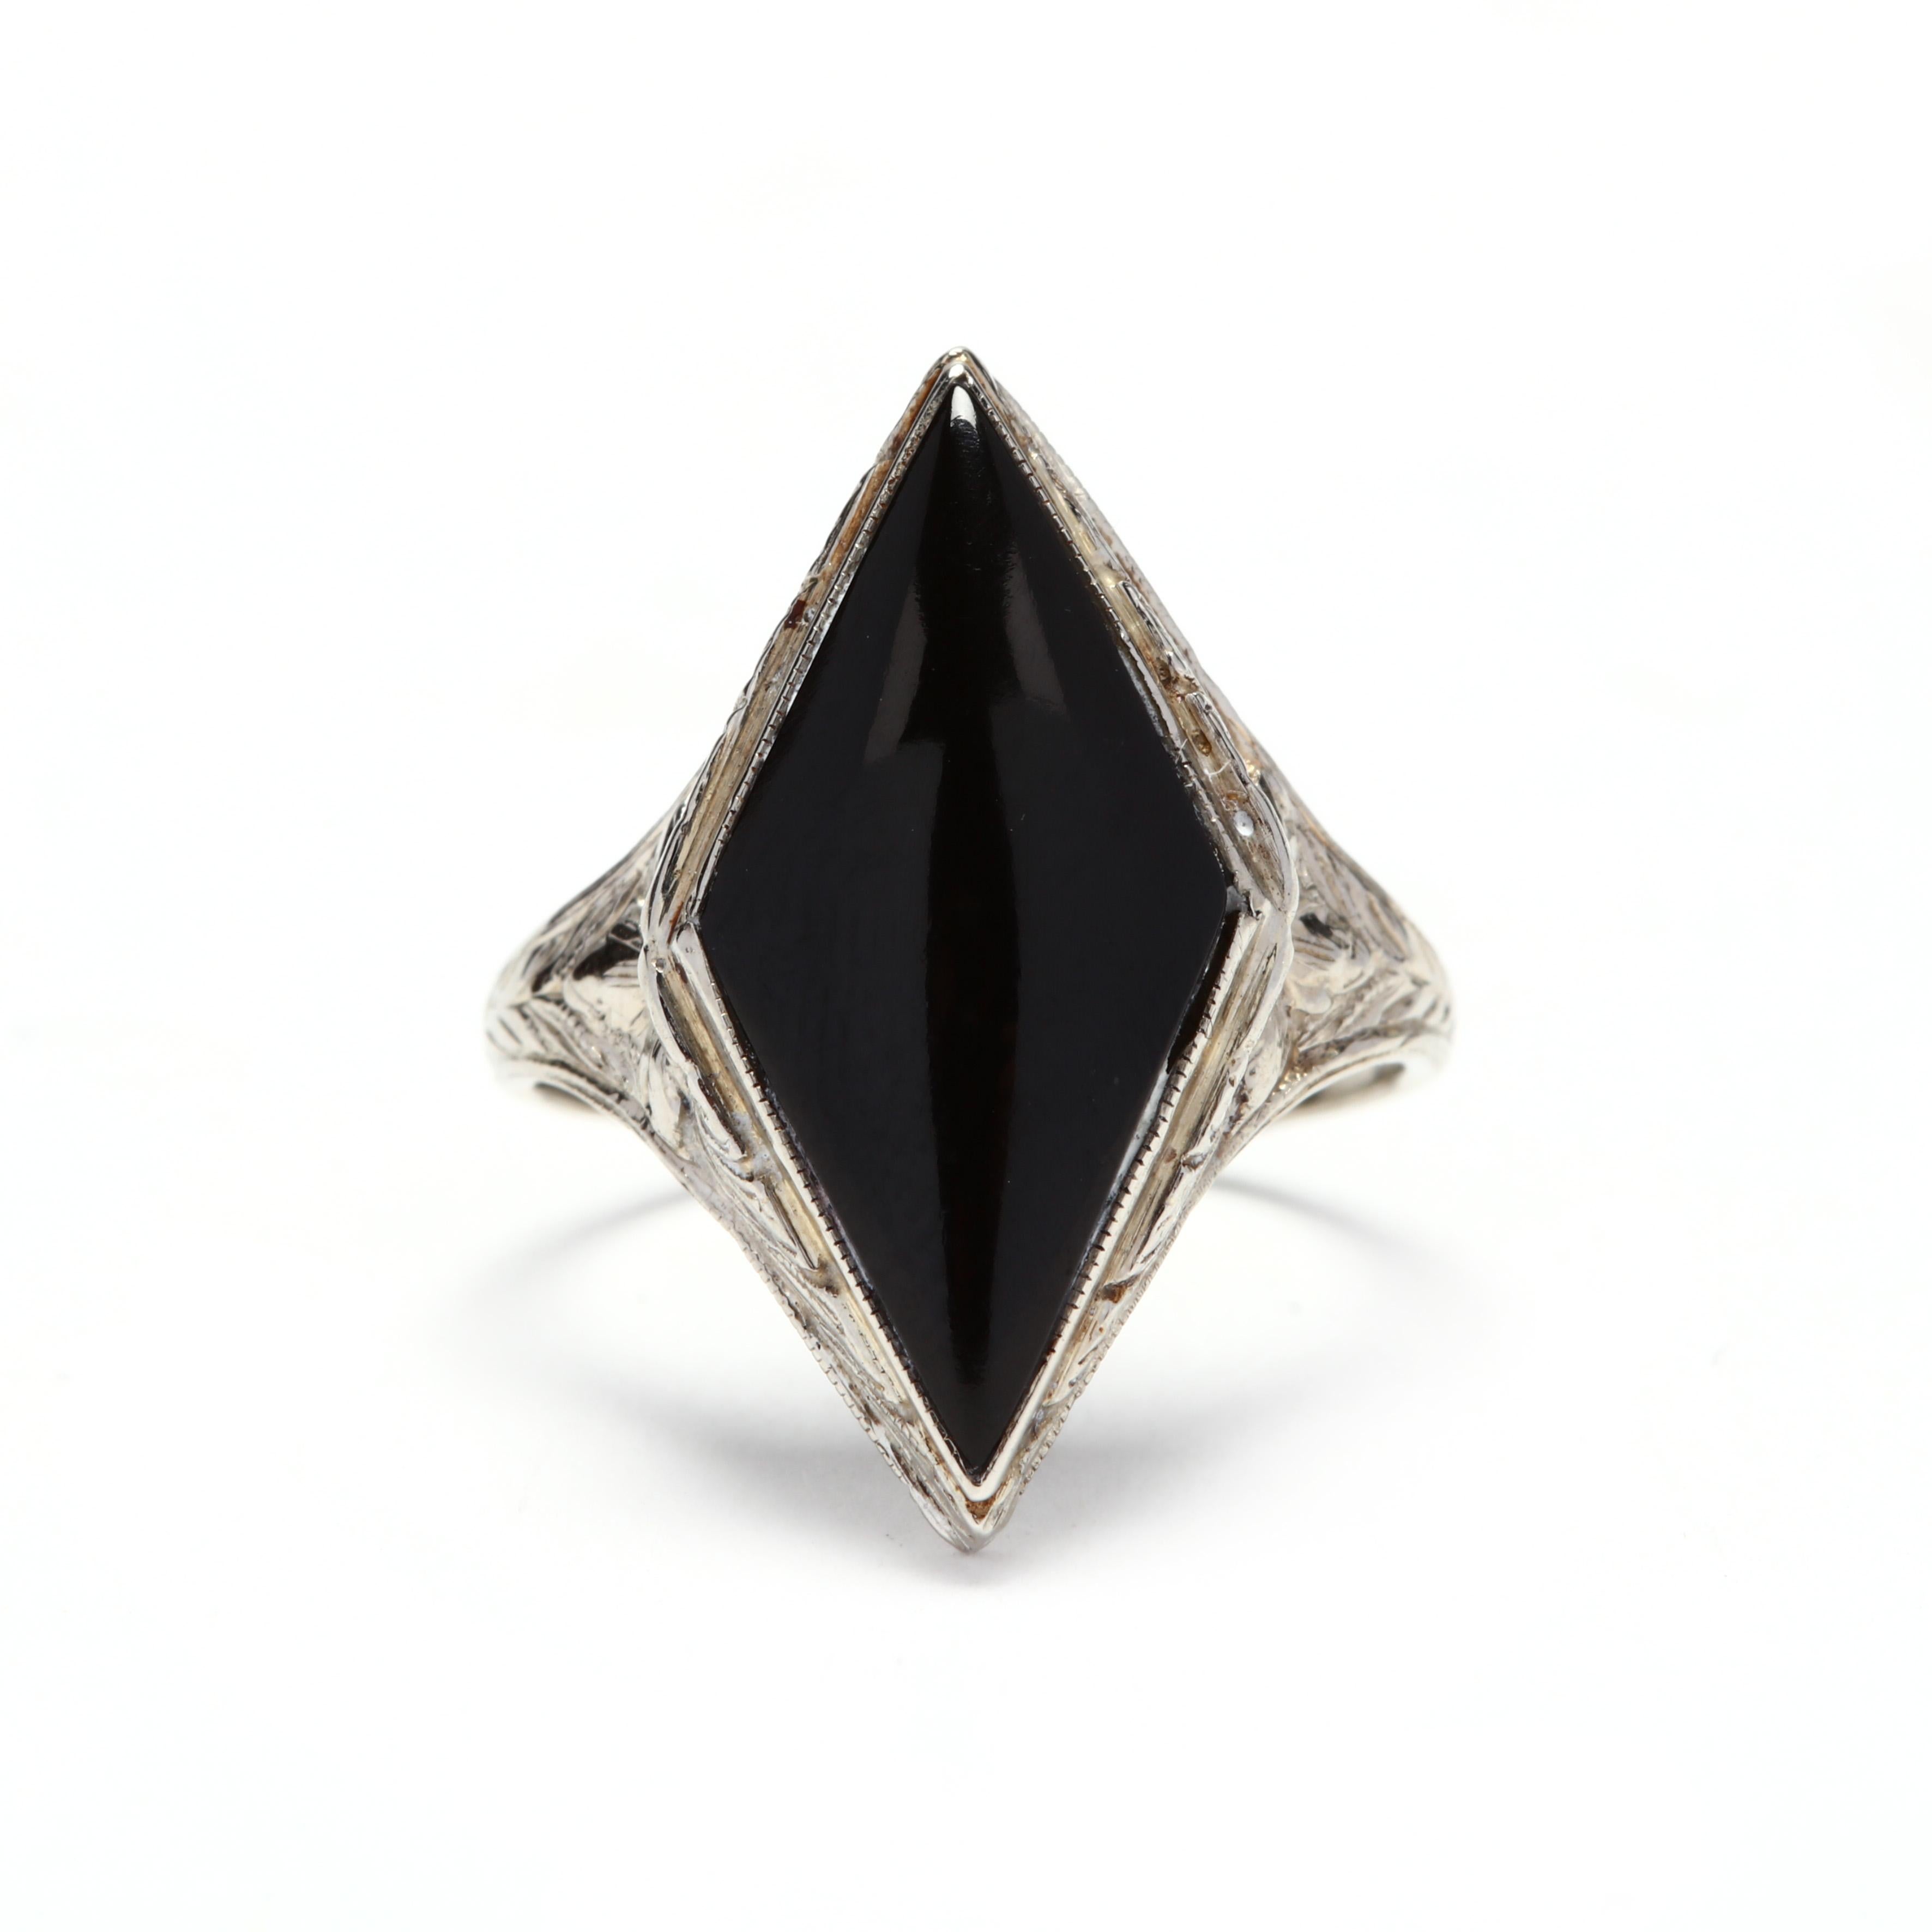 An Art Deco 14 karat white gold black onyx ring. In a navette shape, a bezel set cabochon marquise black onyx stone, set in an ornately engraved mounting.

Stones:
- black onyx, 1 stone
- cabochon marquise cut
- 20 x 10 mm

Ring Size 5.25

Width